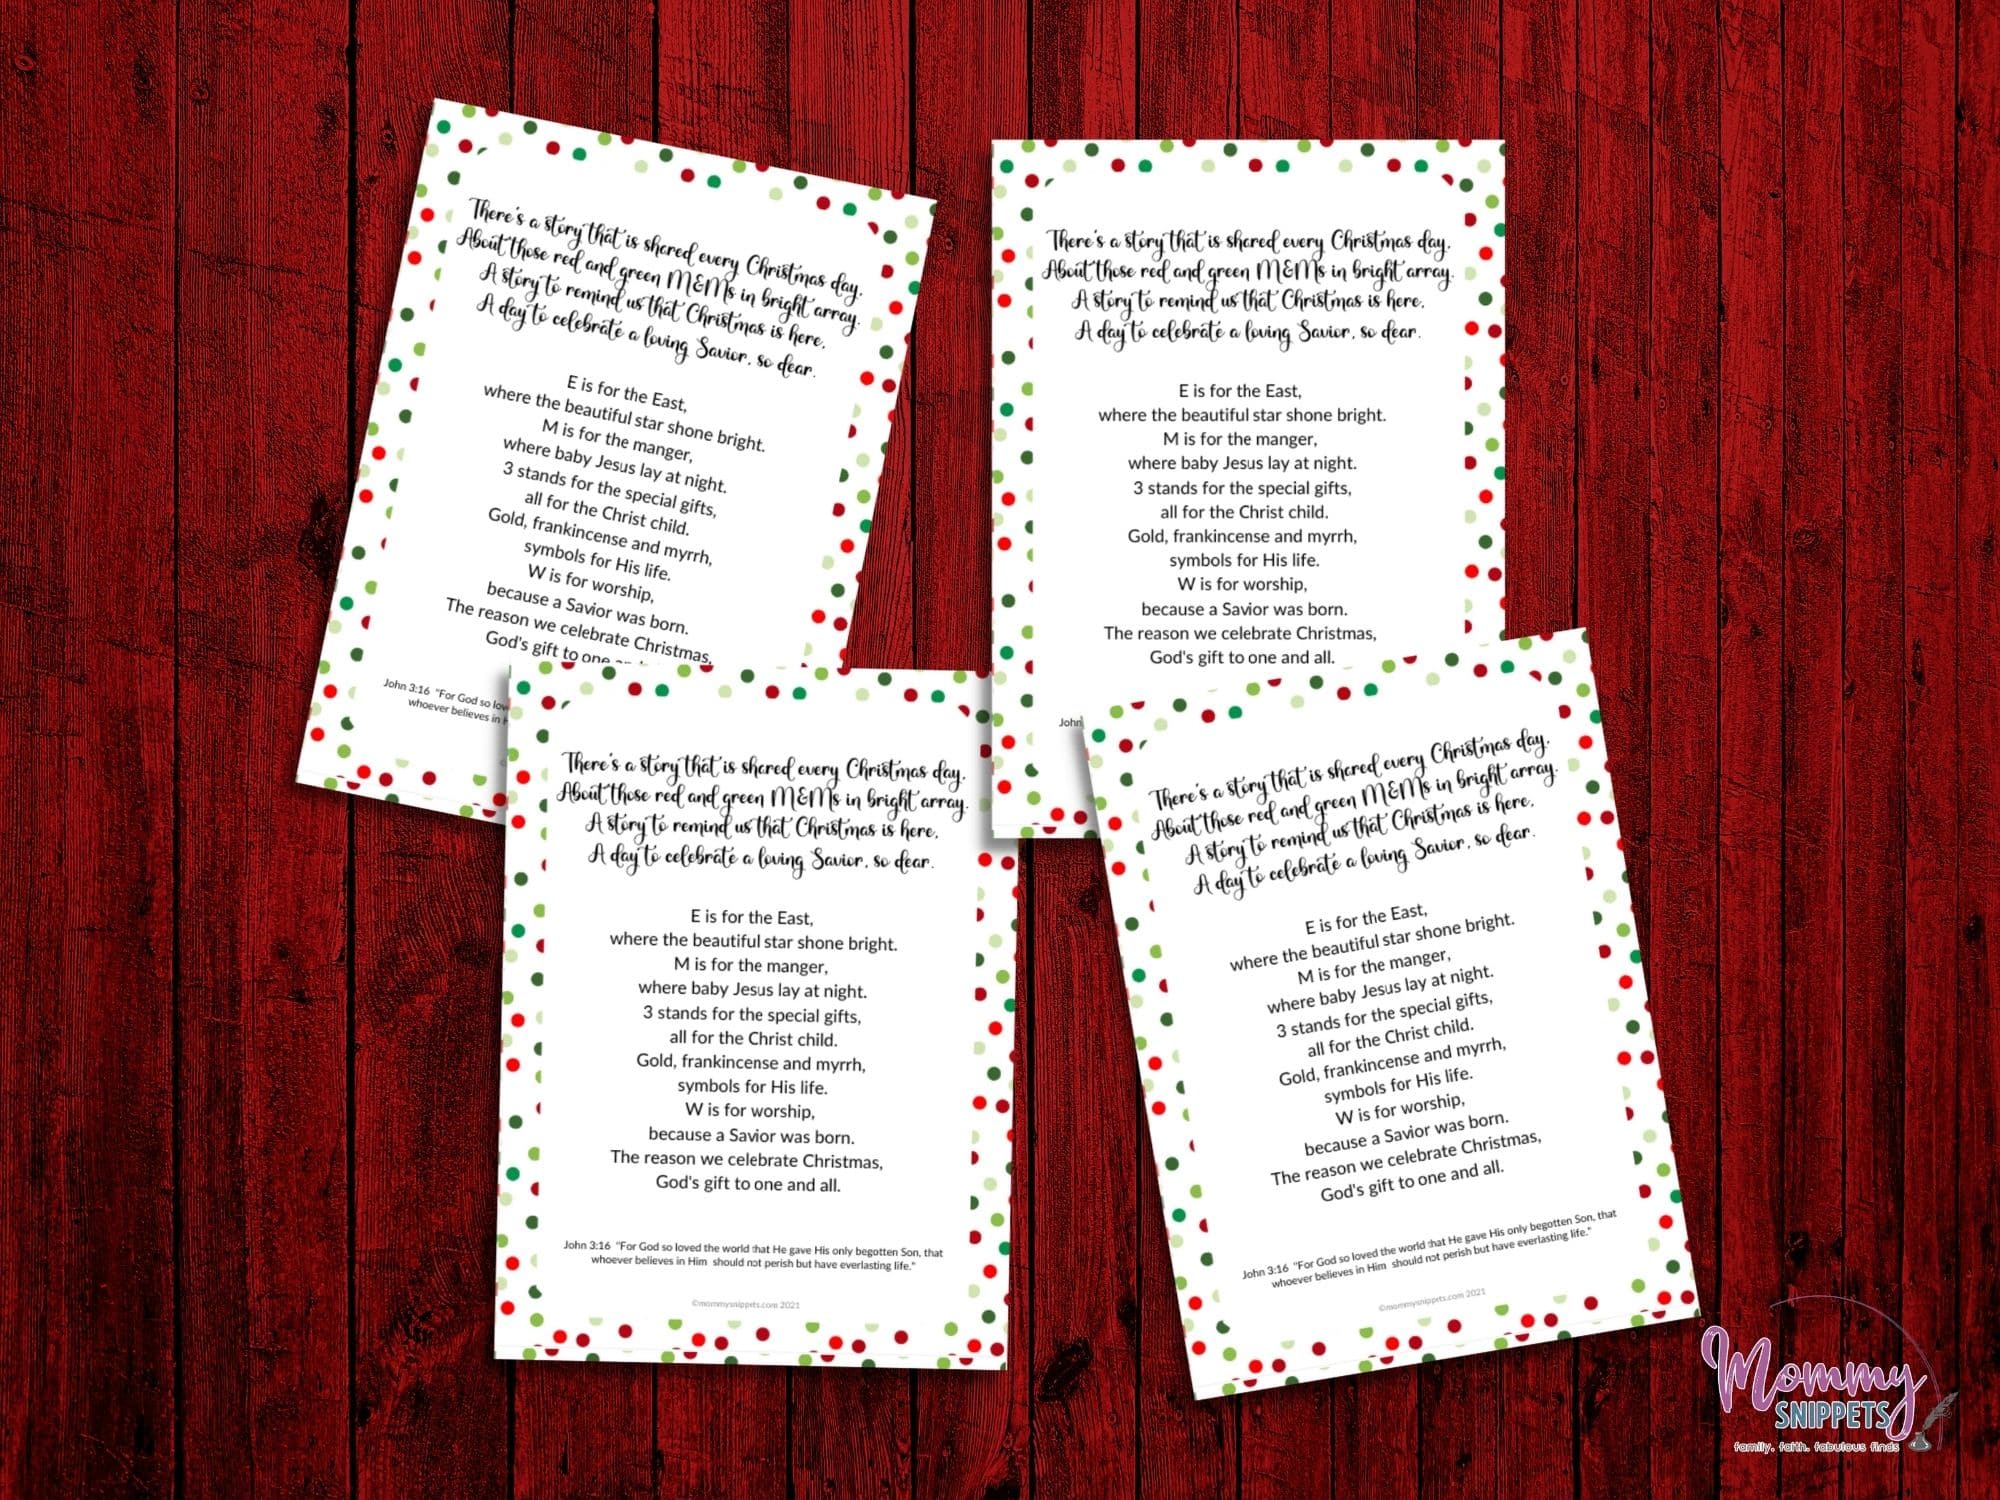 The Christmas M&M's Poem The True Meaning Of Christmas Poem